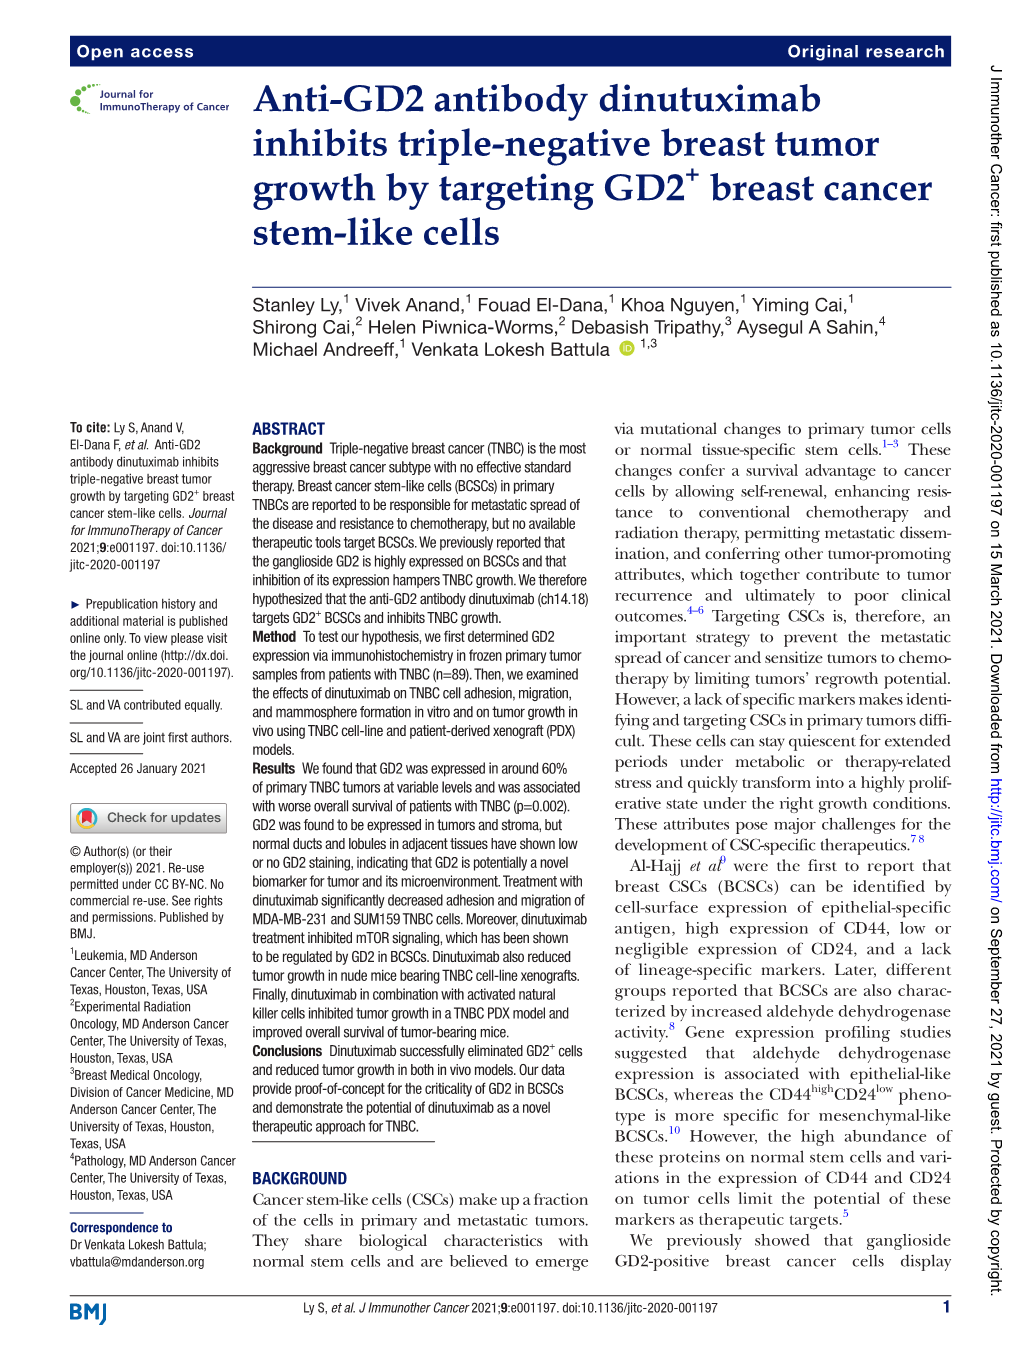 Anti-GD2 Antibody Dinutuximab Inhibits Triple-Negative Breast Tumor Growth by Targeting GD2+ Breast Cancer Stem-Like Cells